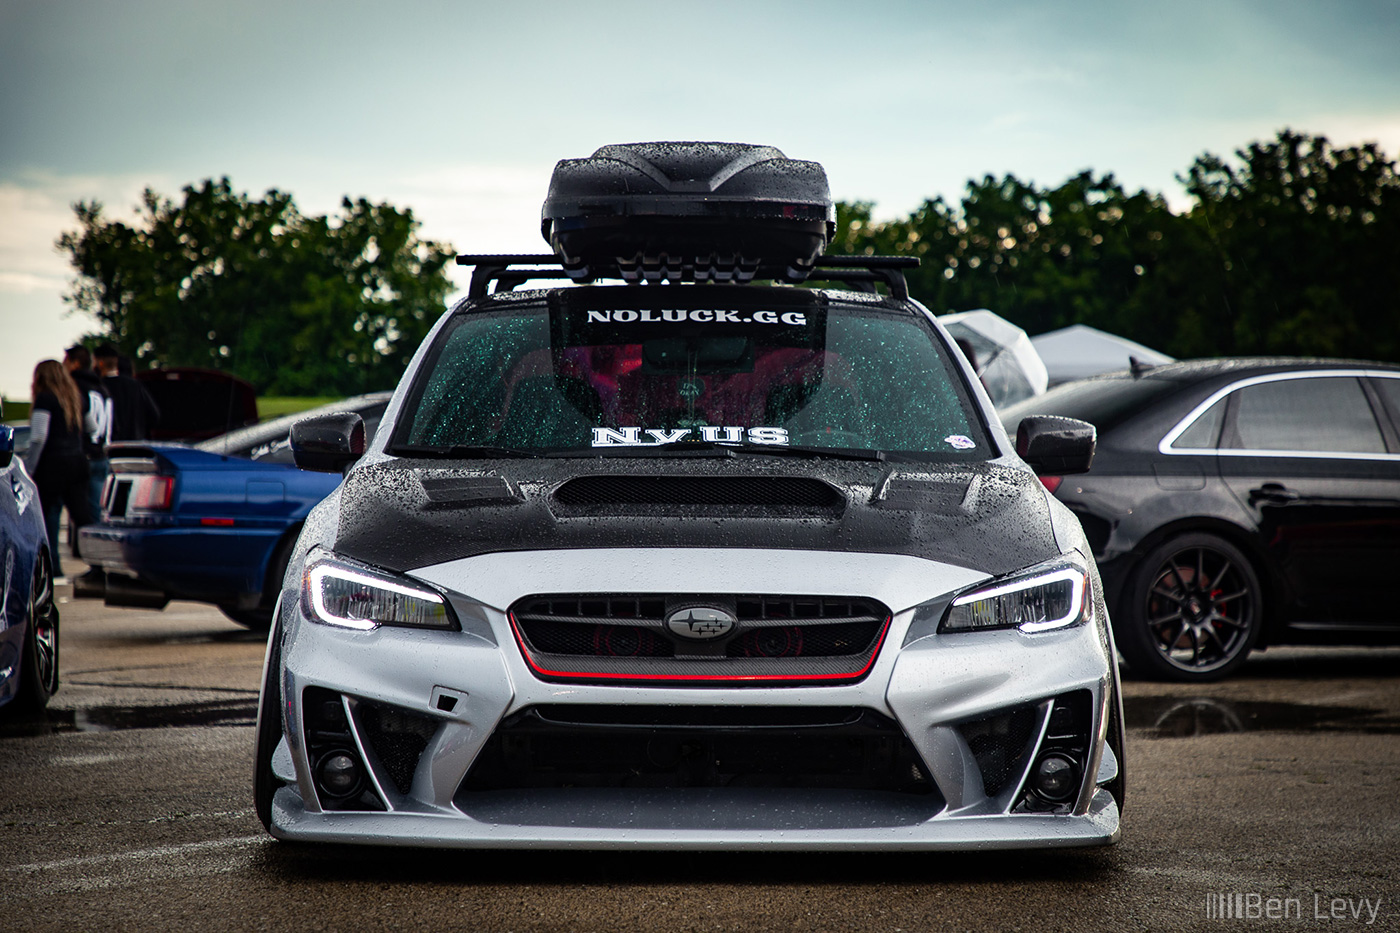 Front of Wet Subaru WRX at Clean Culture car show at Chicago Speedway